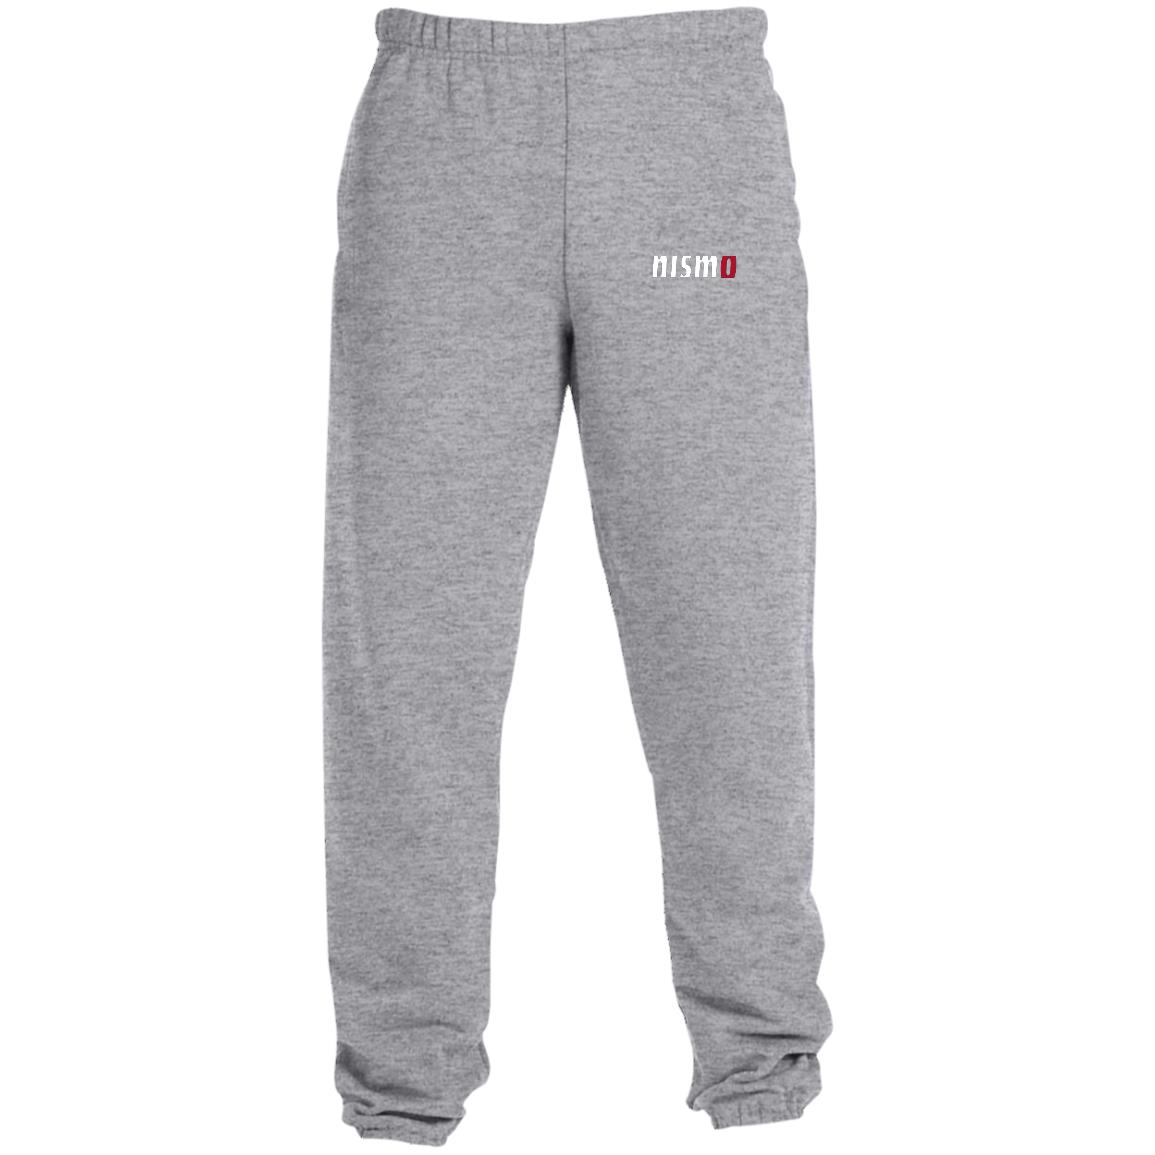 Nismo Sweatpants with Pockets - My Car My Rules